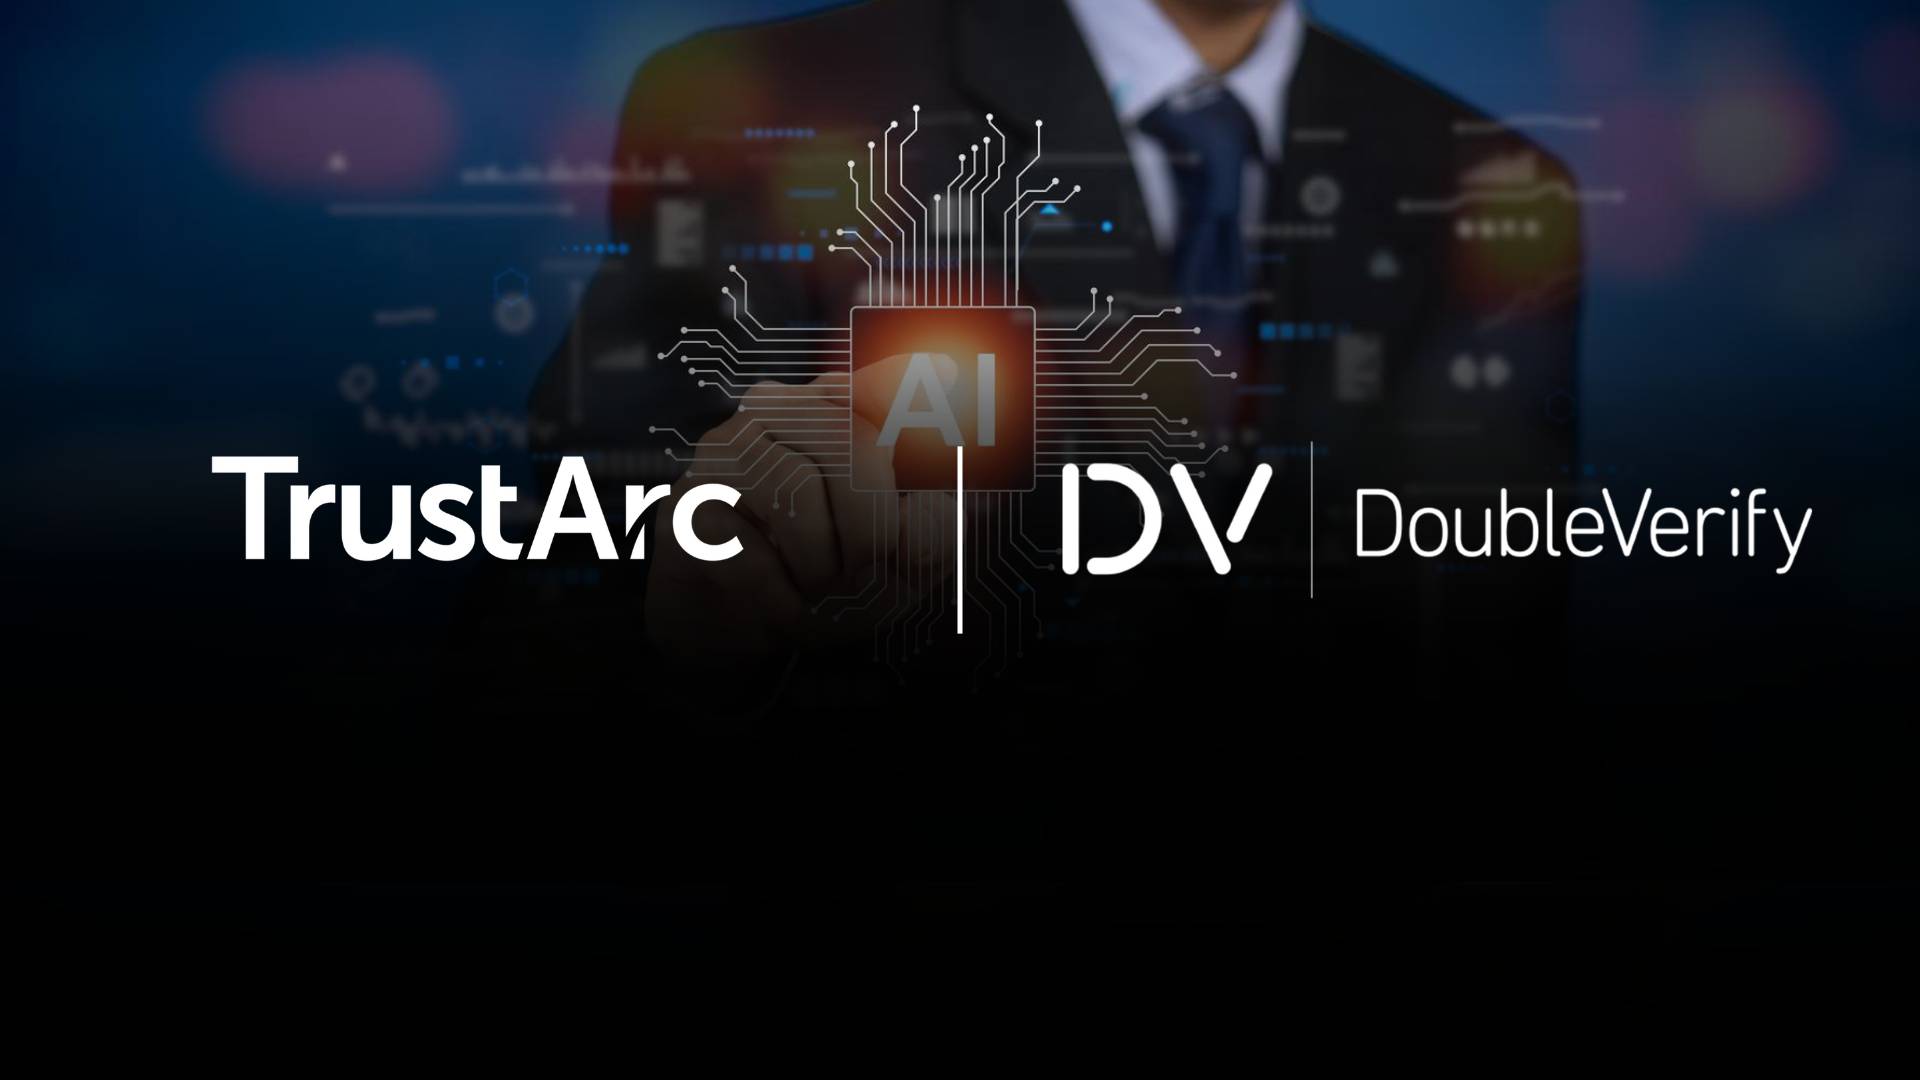 TrustArc Awards DoubleVerify First TRUSTe Responsible AI Certification, Setting Industry Standards